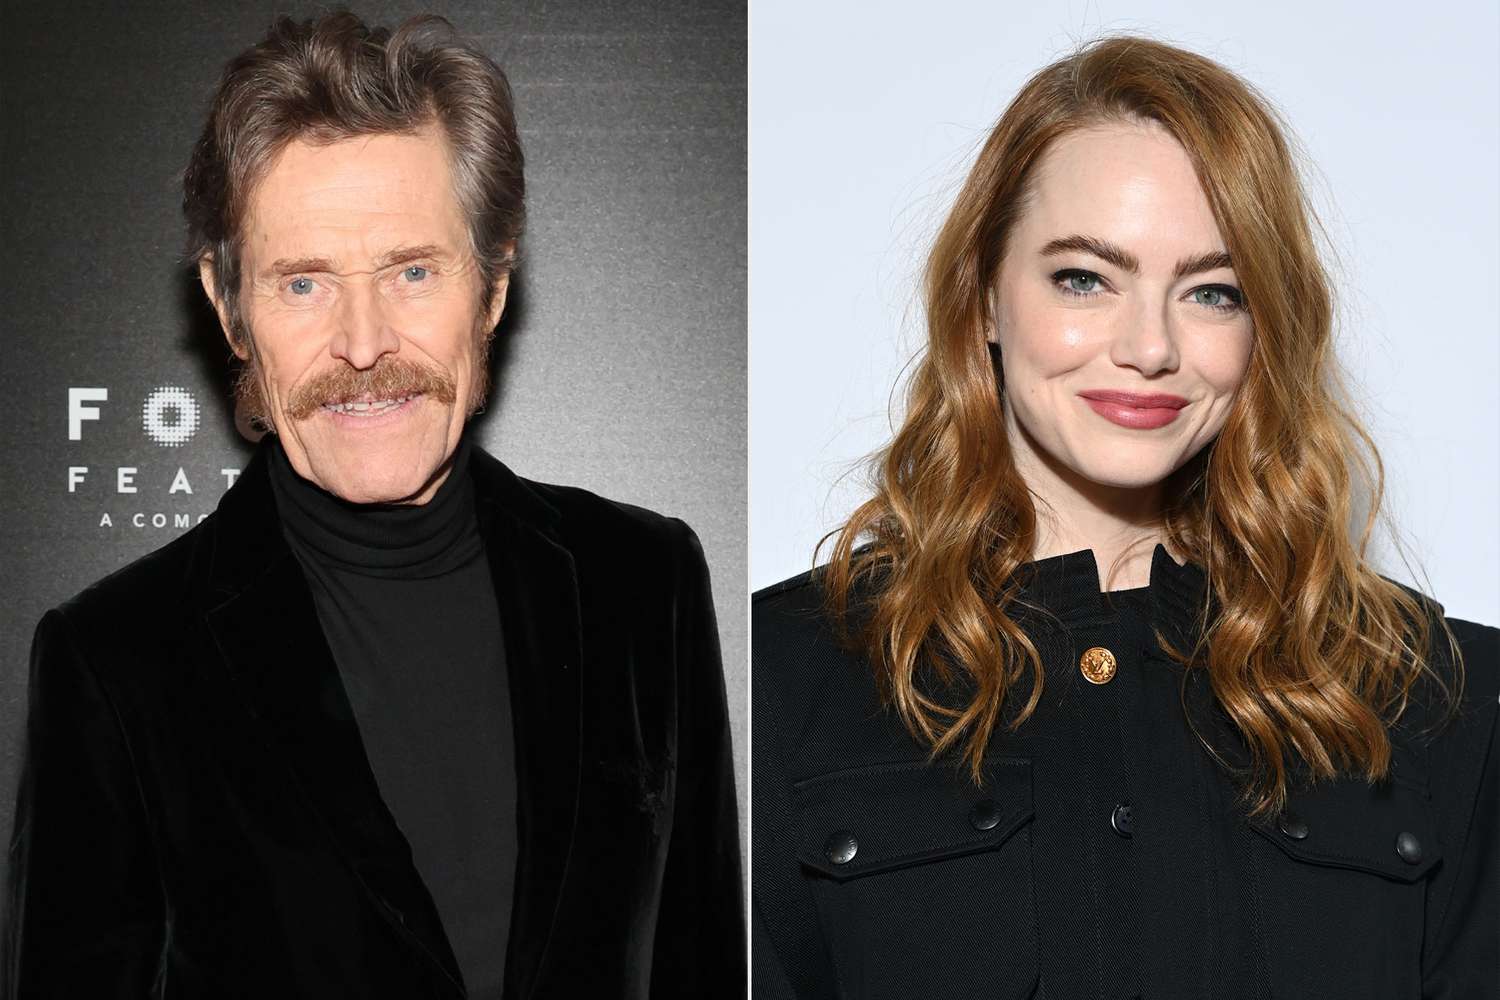 Willem Dafoe attends Focus Features' "Inside" New York Screening at Metrograph on February 28, 2023 in New York City. ; Emma Stone attends the Louis Vuitton Womenswear Fall/Winter 2022/2023 show as part of Paris Fashion Week on March 07, 2022 in Paris, France.